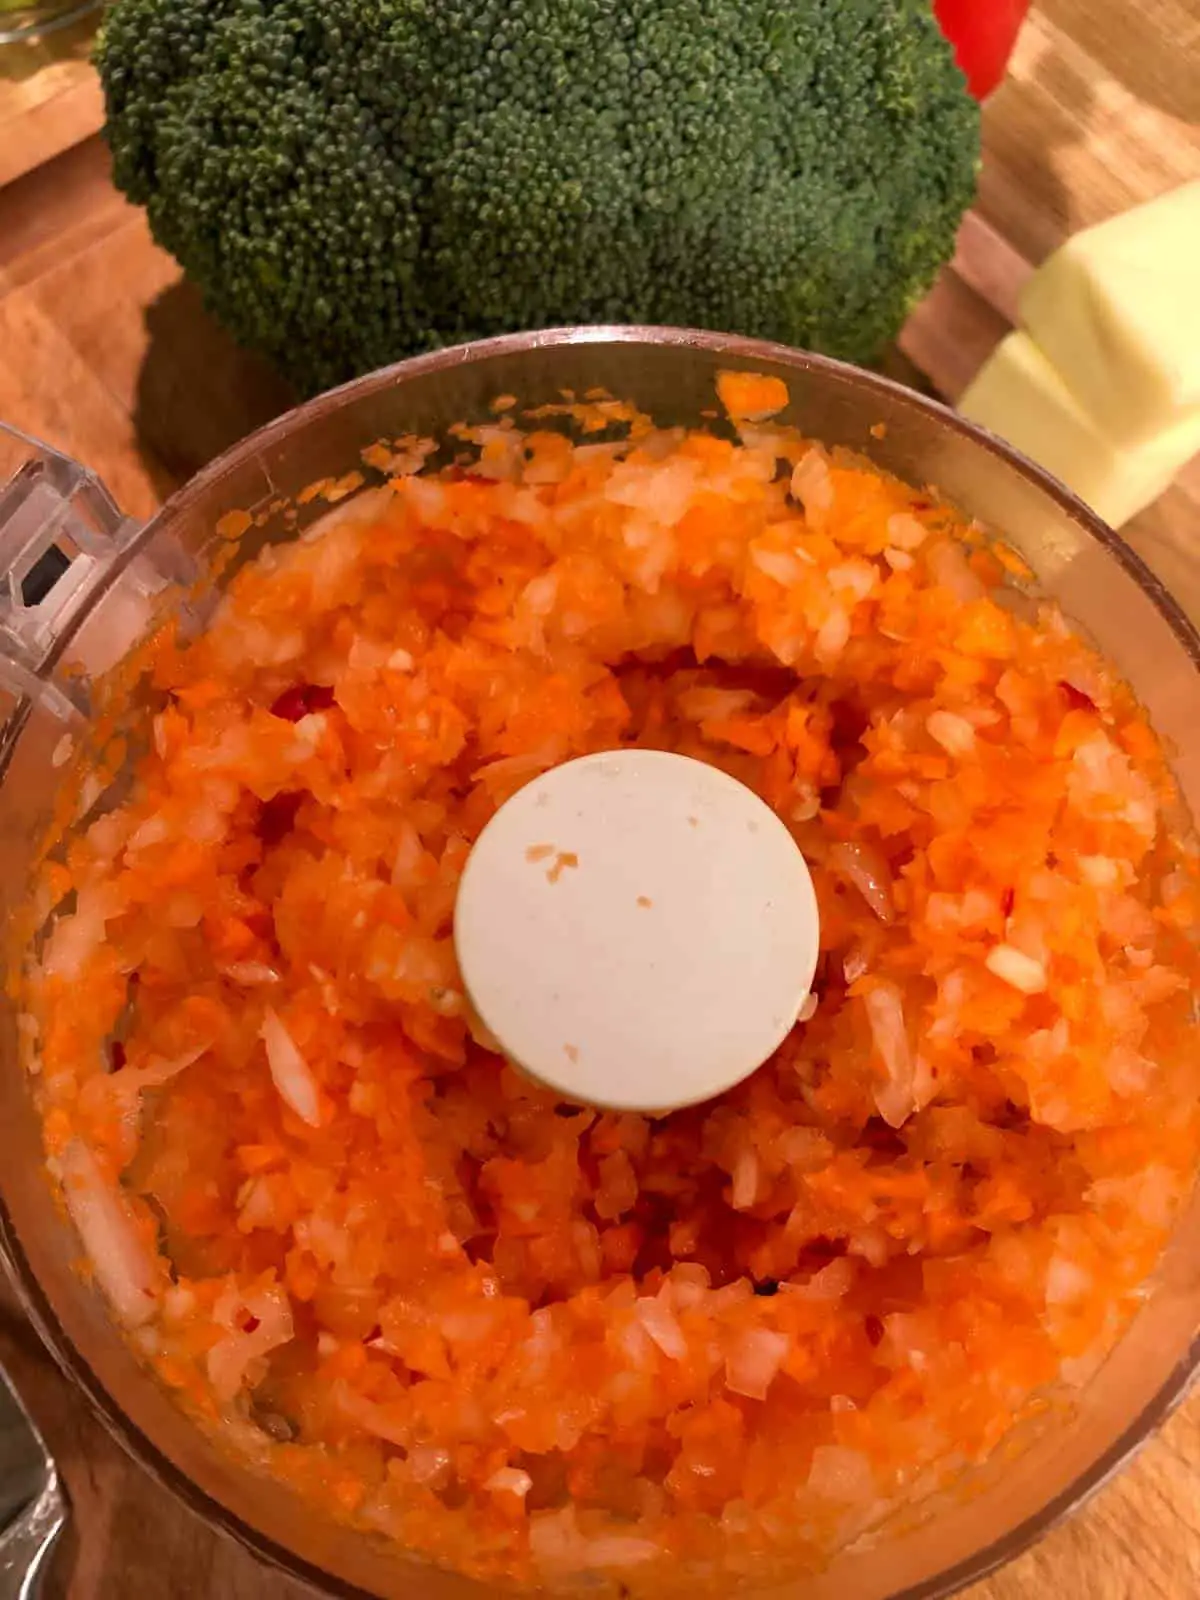 Minced carrot and onion in a food processor with a head of broccoli and some butter in the background.